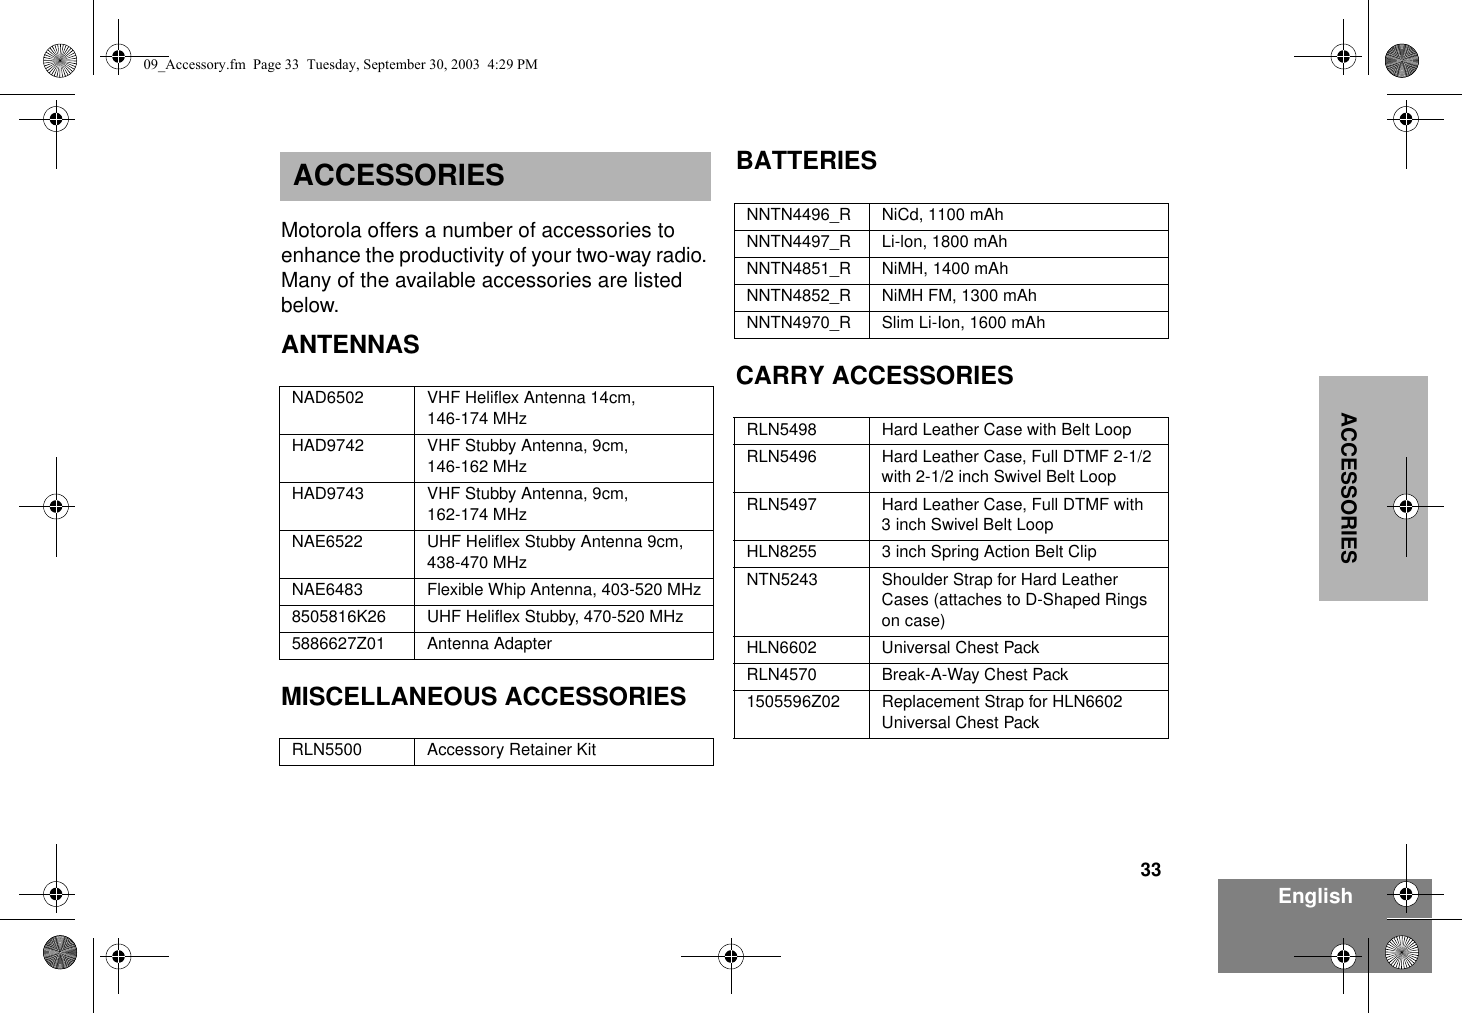 33EnglishACCESSORIESACCESSORIESMotorola offers a number of accessories to enhance the productivity of your two-way radio. Many of the available accessories are listed below.ANTENNASMISCELLANEOUS ACCESSORIESBATTERIESCARRY ACCESSORIESNAD6502 VHF Heliflex Antenna 14cm, 146-174 MHzHAD9742 VHF Stubby Antenna, 9cm,146-162 MHzHAD9743 VHF Stubby Antenna, 9cm,162-174 MHzNAE6522 UHF Heliflex Stubby Antenna 9cm, 438-470 MHzNAE6483 Flexible Whip Antenna, 403-520 MHz8505816K26 UHF Heliflex Stubby, 470-520 MHz5886627Z01 Antenna AdapterRLN5500 Accessory Retainer KitNNTN4496_R NiCd, 1100 mAhNNTN4497_R Li-lon, 1800 mAhNNTN4851_R NiMH, 1400 mAhNNTN4852_R NiMH FM, 1300 mAhNNTN4970_R Slim Li-Ion, 1600 mAhRLN5498 Hard Leather Case with Belt LoopRLN5496 Hard Leather Case, Full DTMF 2-1/2 with 2-1/2 inch Swivel Belt LoopRLN5497 Hard Leather Case, Full DTMF with3 inch Swivel Belt LoopHLN8255 3 inch Spring Action Belt ClipNTN5243 Shoulder Strap for Hard Leather Cases (attaches to D-Shaped Rings on case)HLN6602 Universal Chest PackRLN4570 Break-A-Way Chest Pack1505596Z02 Replacement Strap for HLN6602 Universal Chest Pack09_Accessory.fm  Page 33  Tuesday, September 30, 2003  4:29 PM